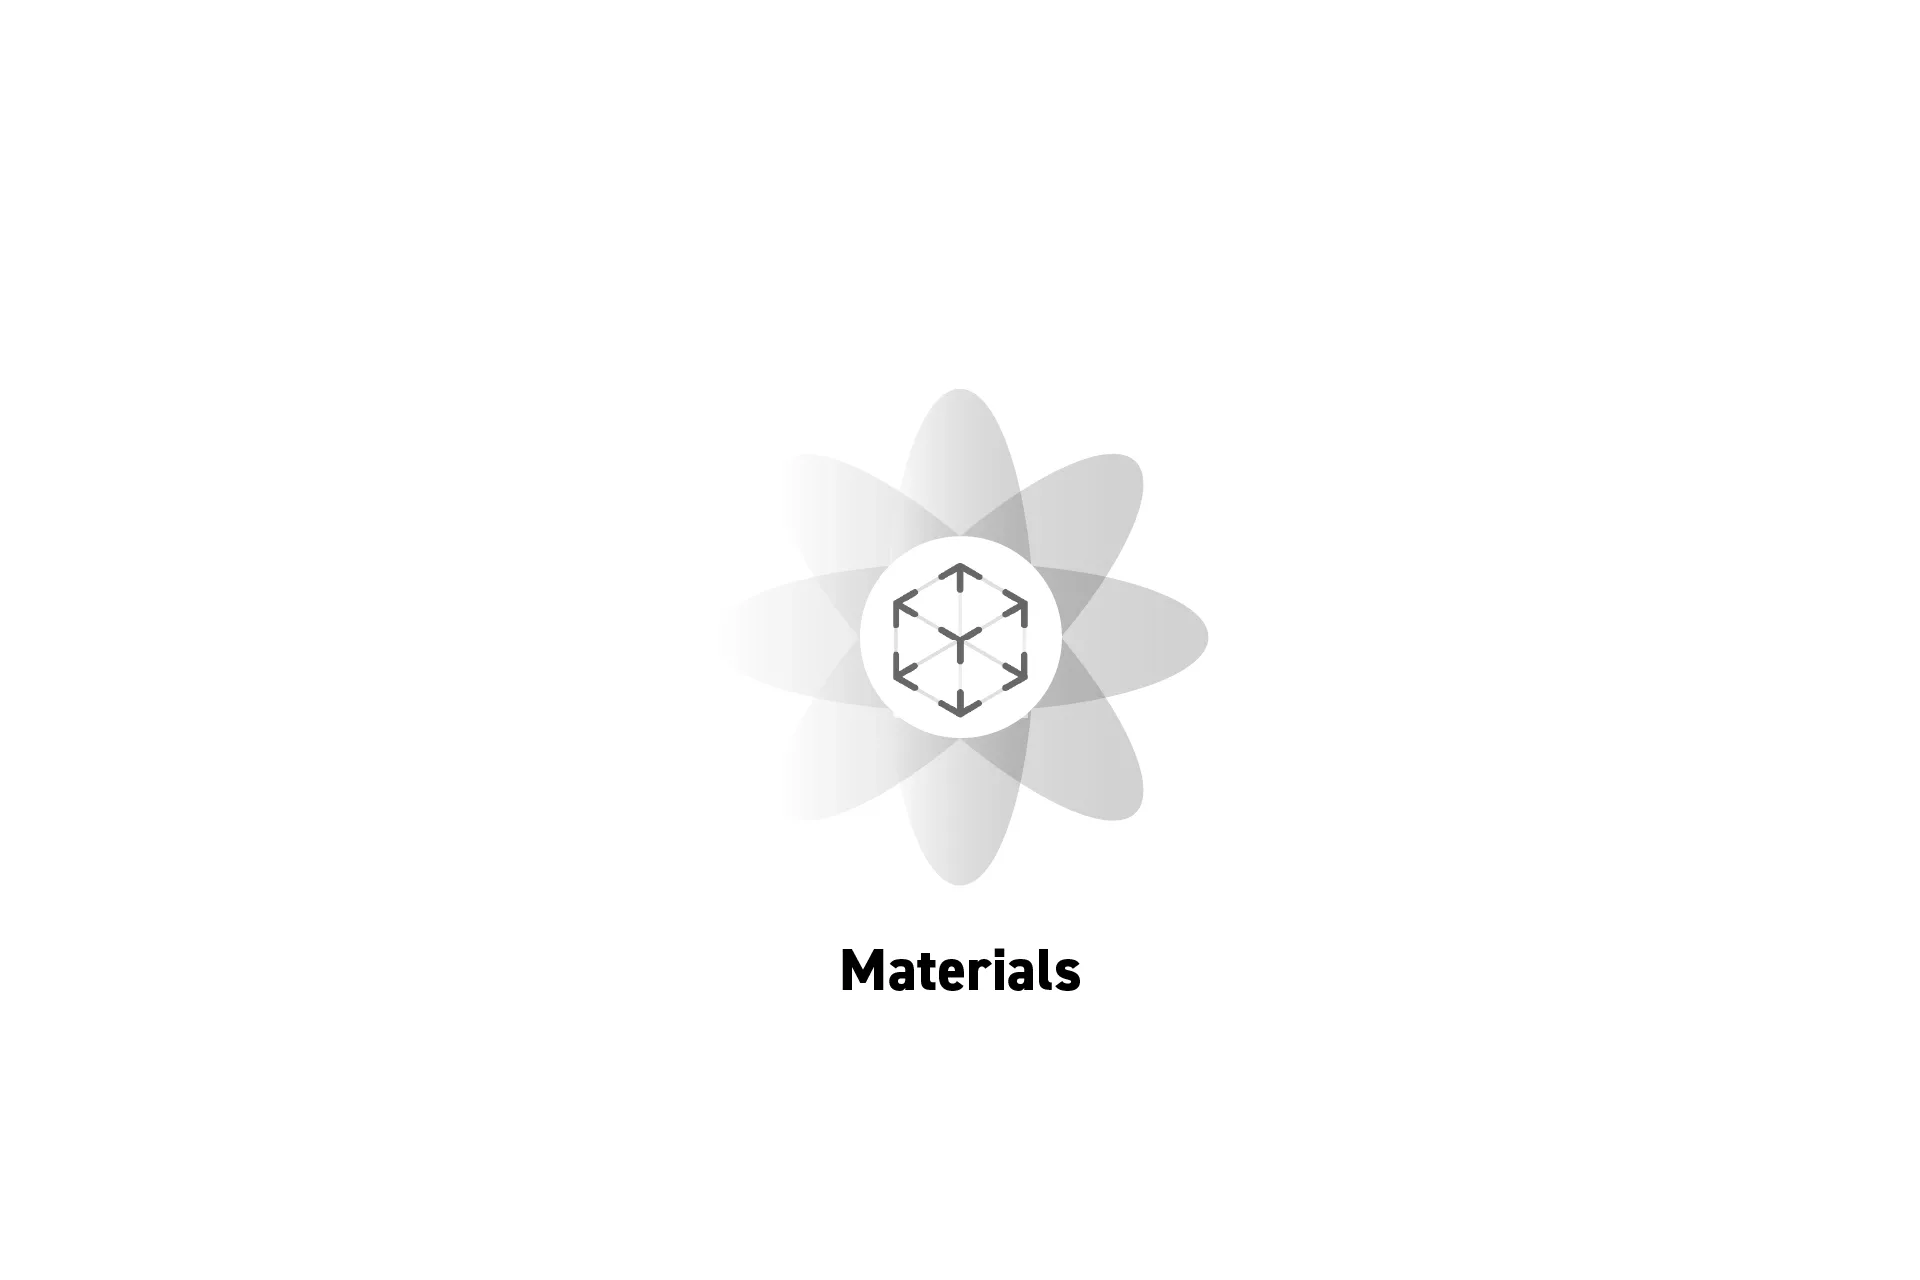 A flower that represents spatial computing with the text "Materials" beneath it.